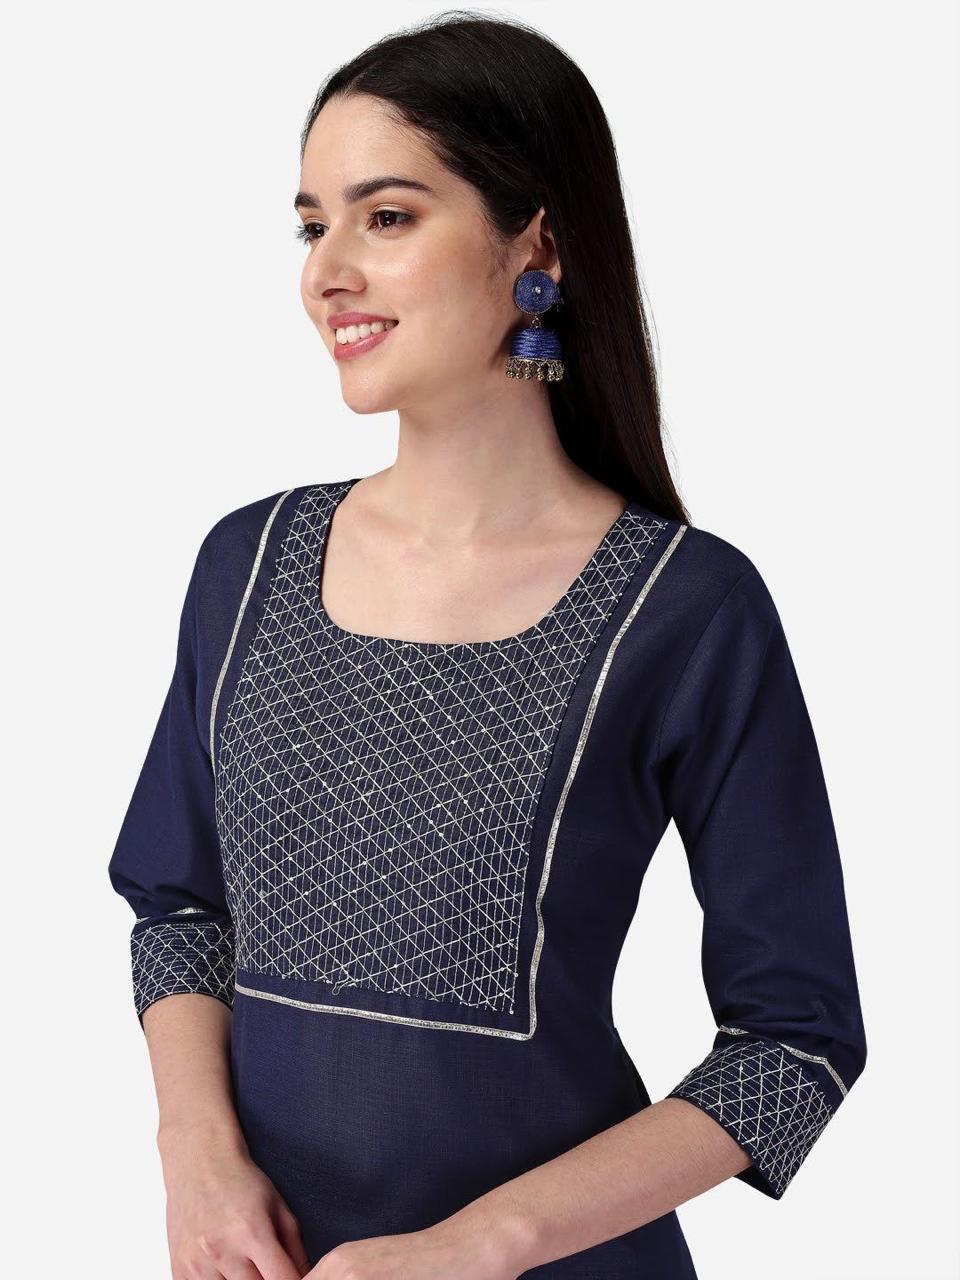 channel 9 sku 121 to 125 cotton elegant top with bottom size set